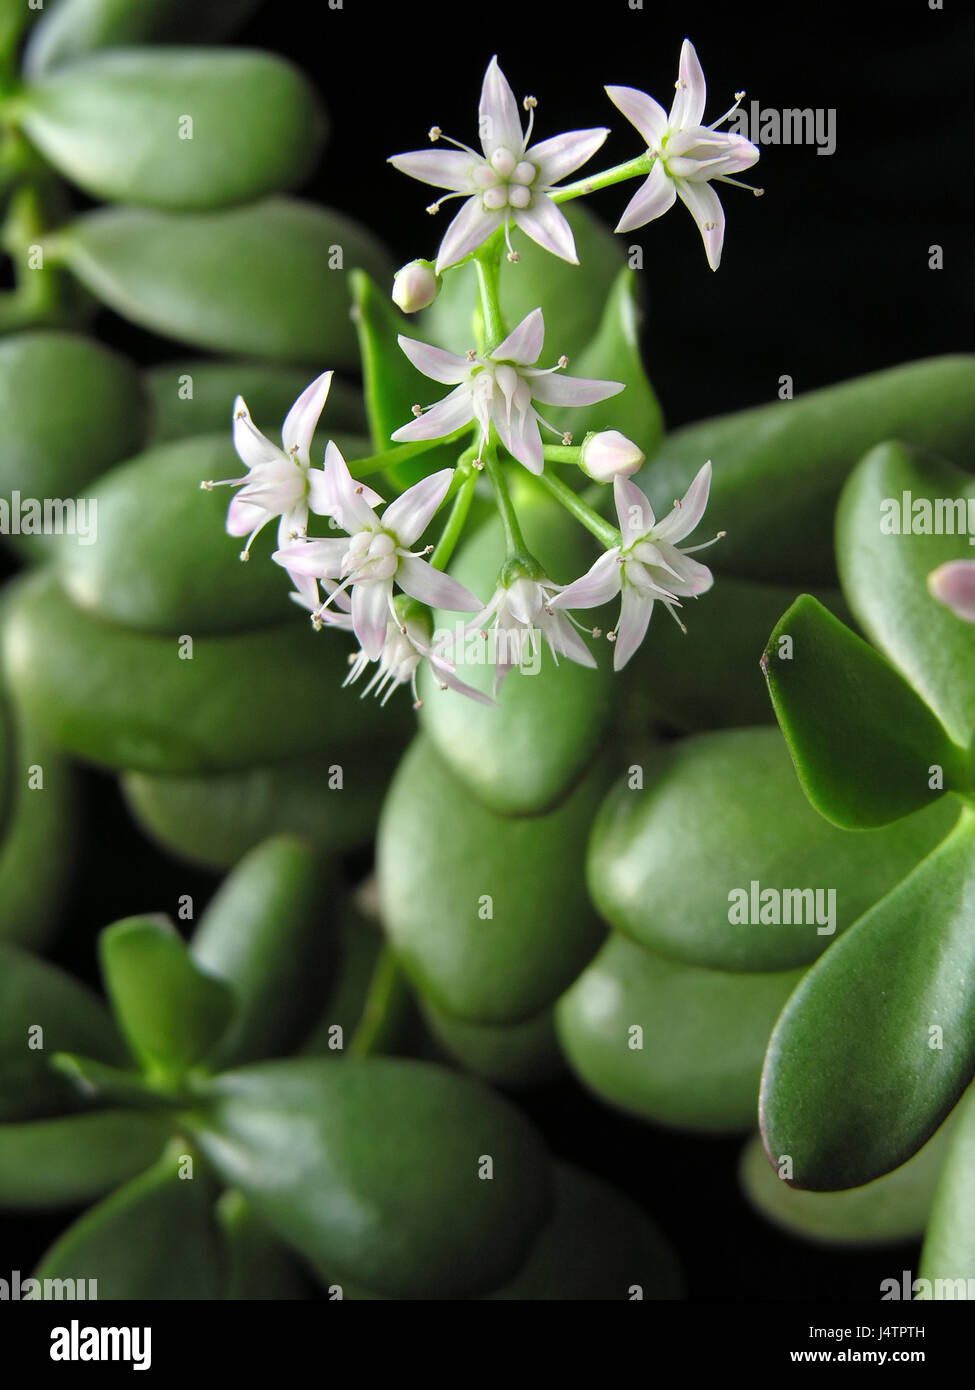 Crassula ovata with flowers, known also as jade plant or money tree, friendship tree, lucky plant, on black background Stock Photo